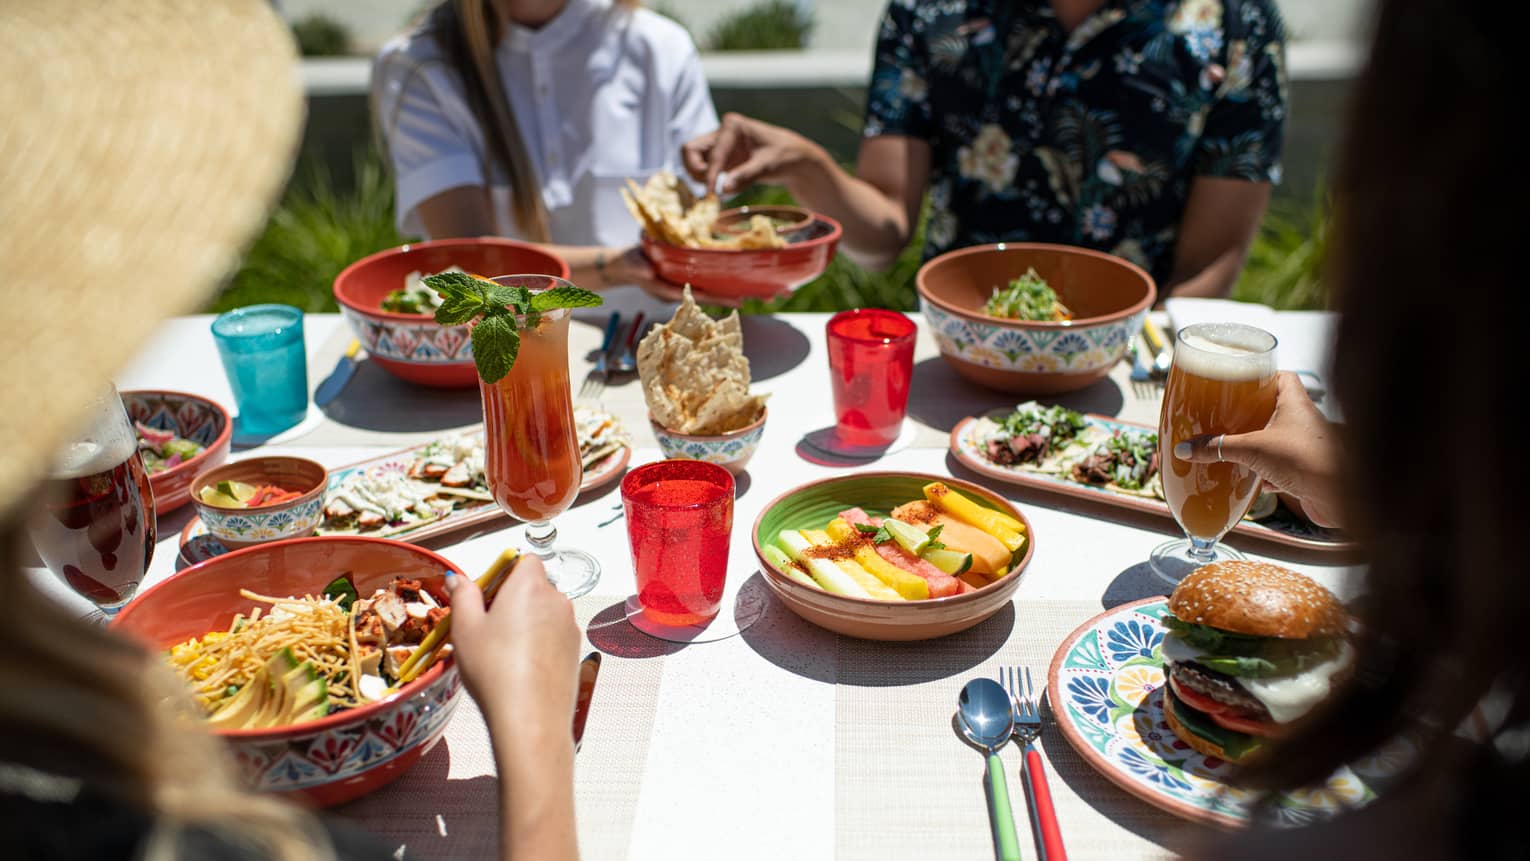 A group of young people eating food outside on colourful plates and bowls.